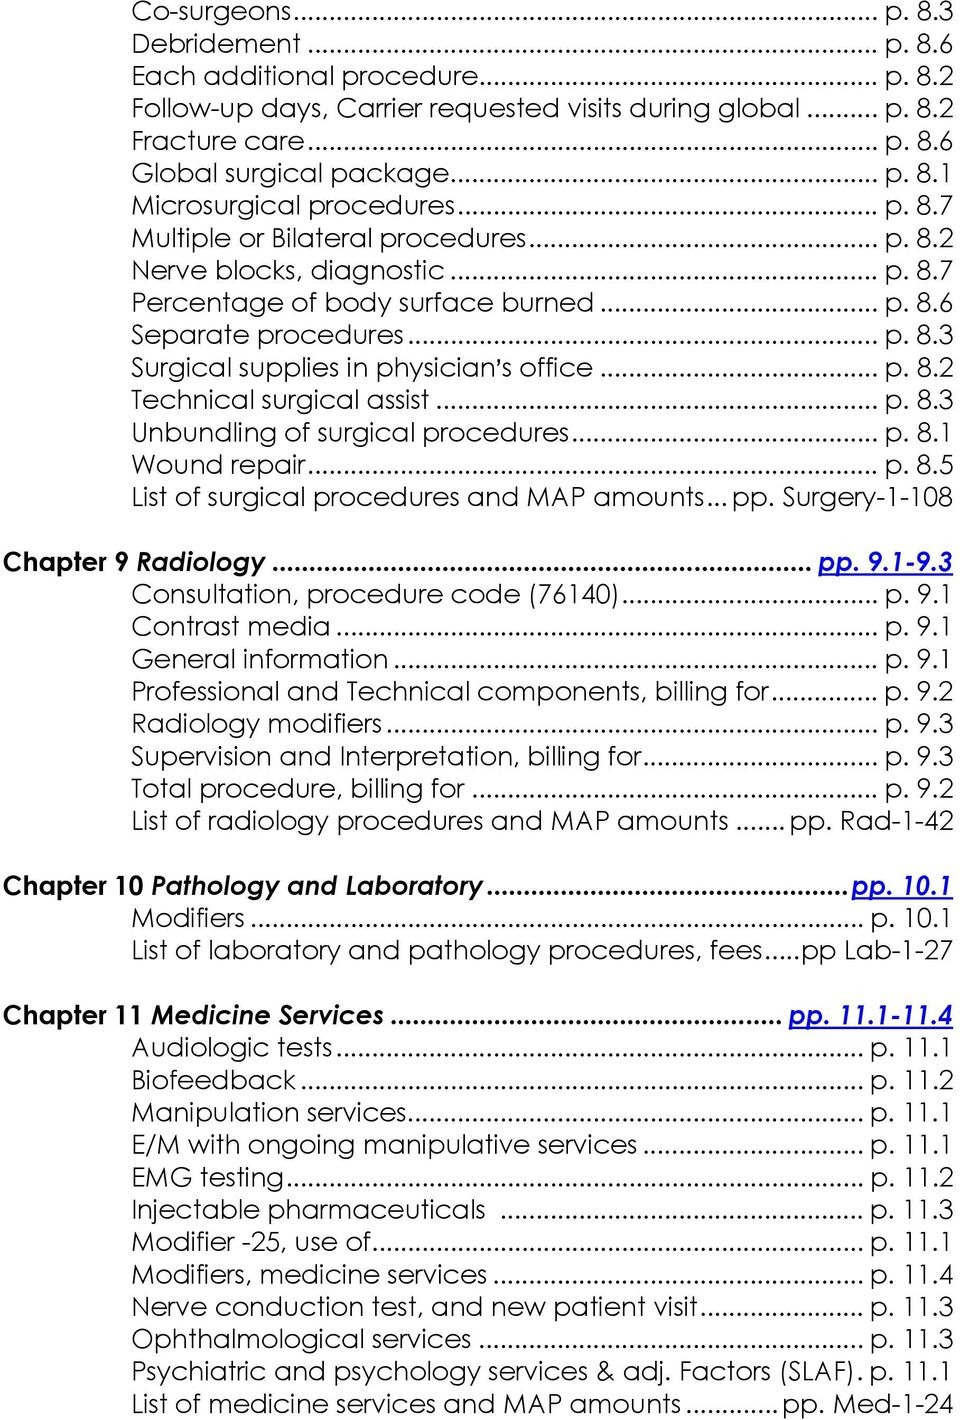 .. p. 8.2 Technical surgical assist... p. 8.3 Unbundling of surgical procedures... p. 8.1 Wound repair... p. 8.5 List of surgical procedures and MAP amounts... pp. Surgery-1-108 Chapter 9 Radiology.